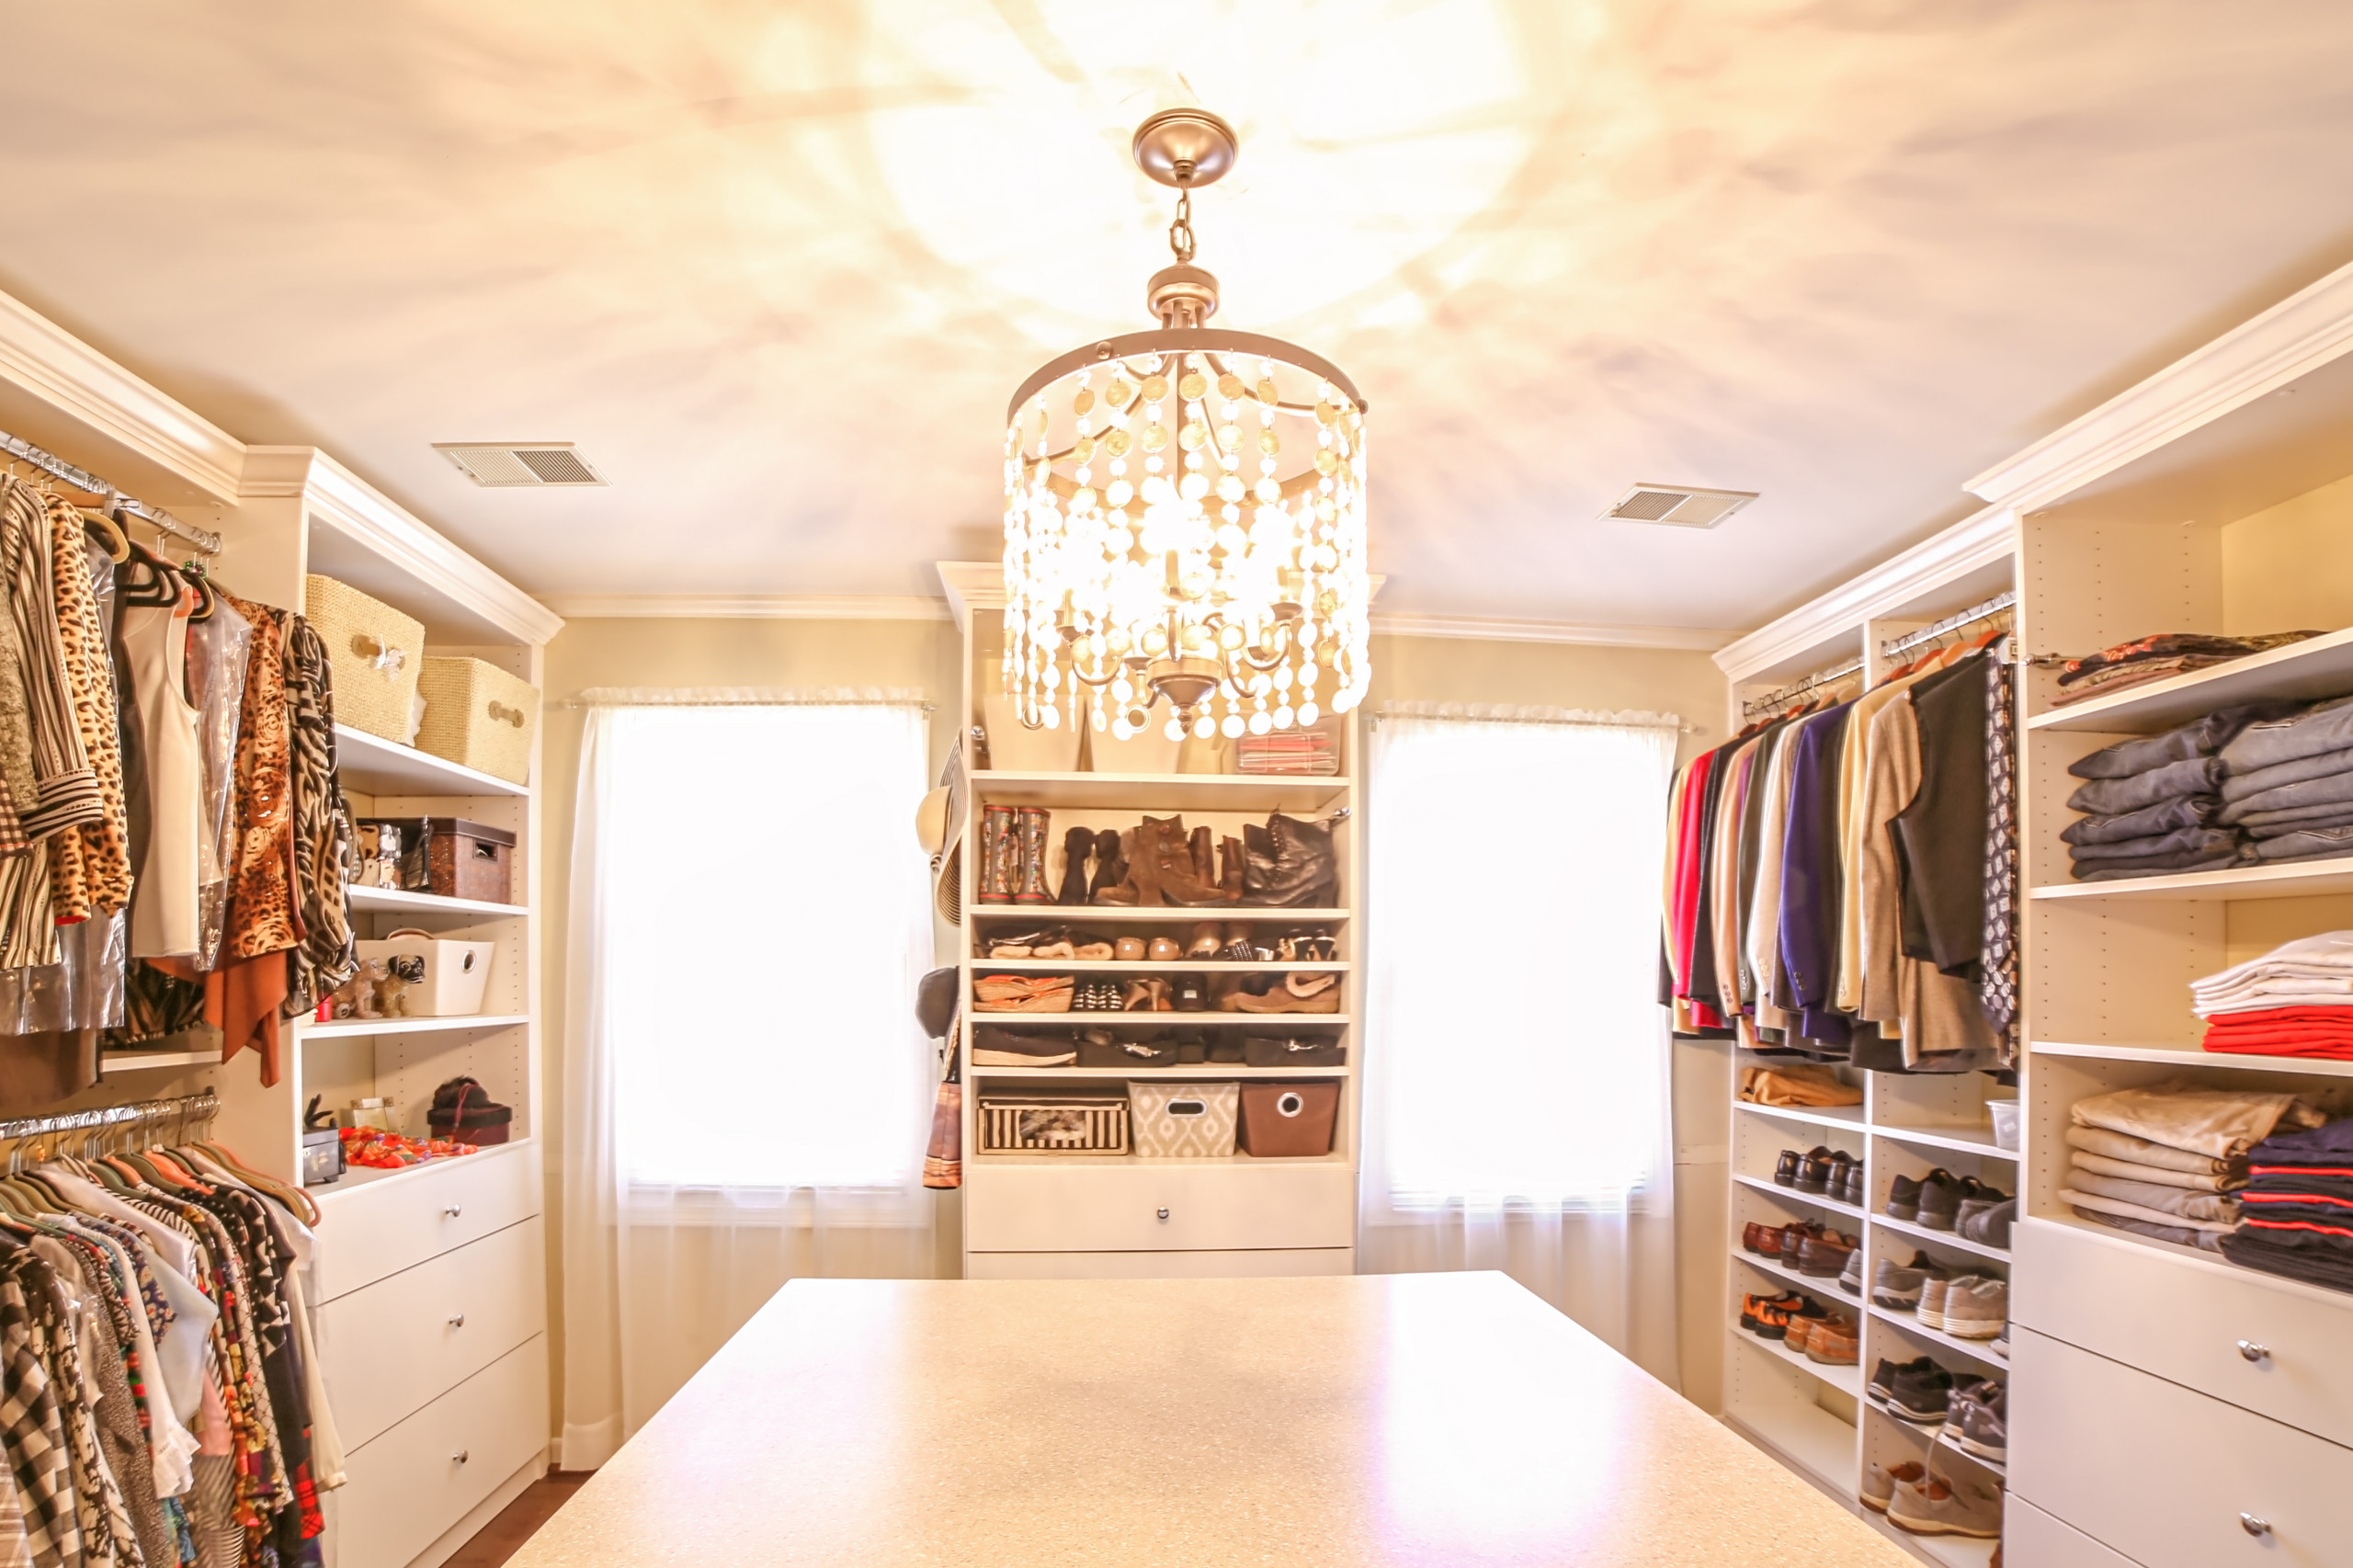 We turned this spare bedroom into a beautiful custom built closet. The homeowner wanted simple yet elegant. The crown detail completes the look.